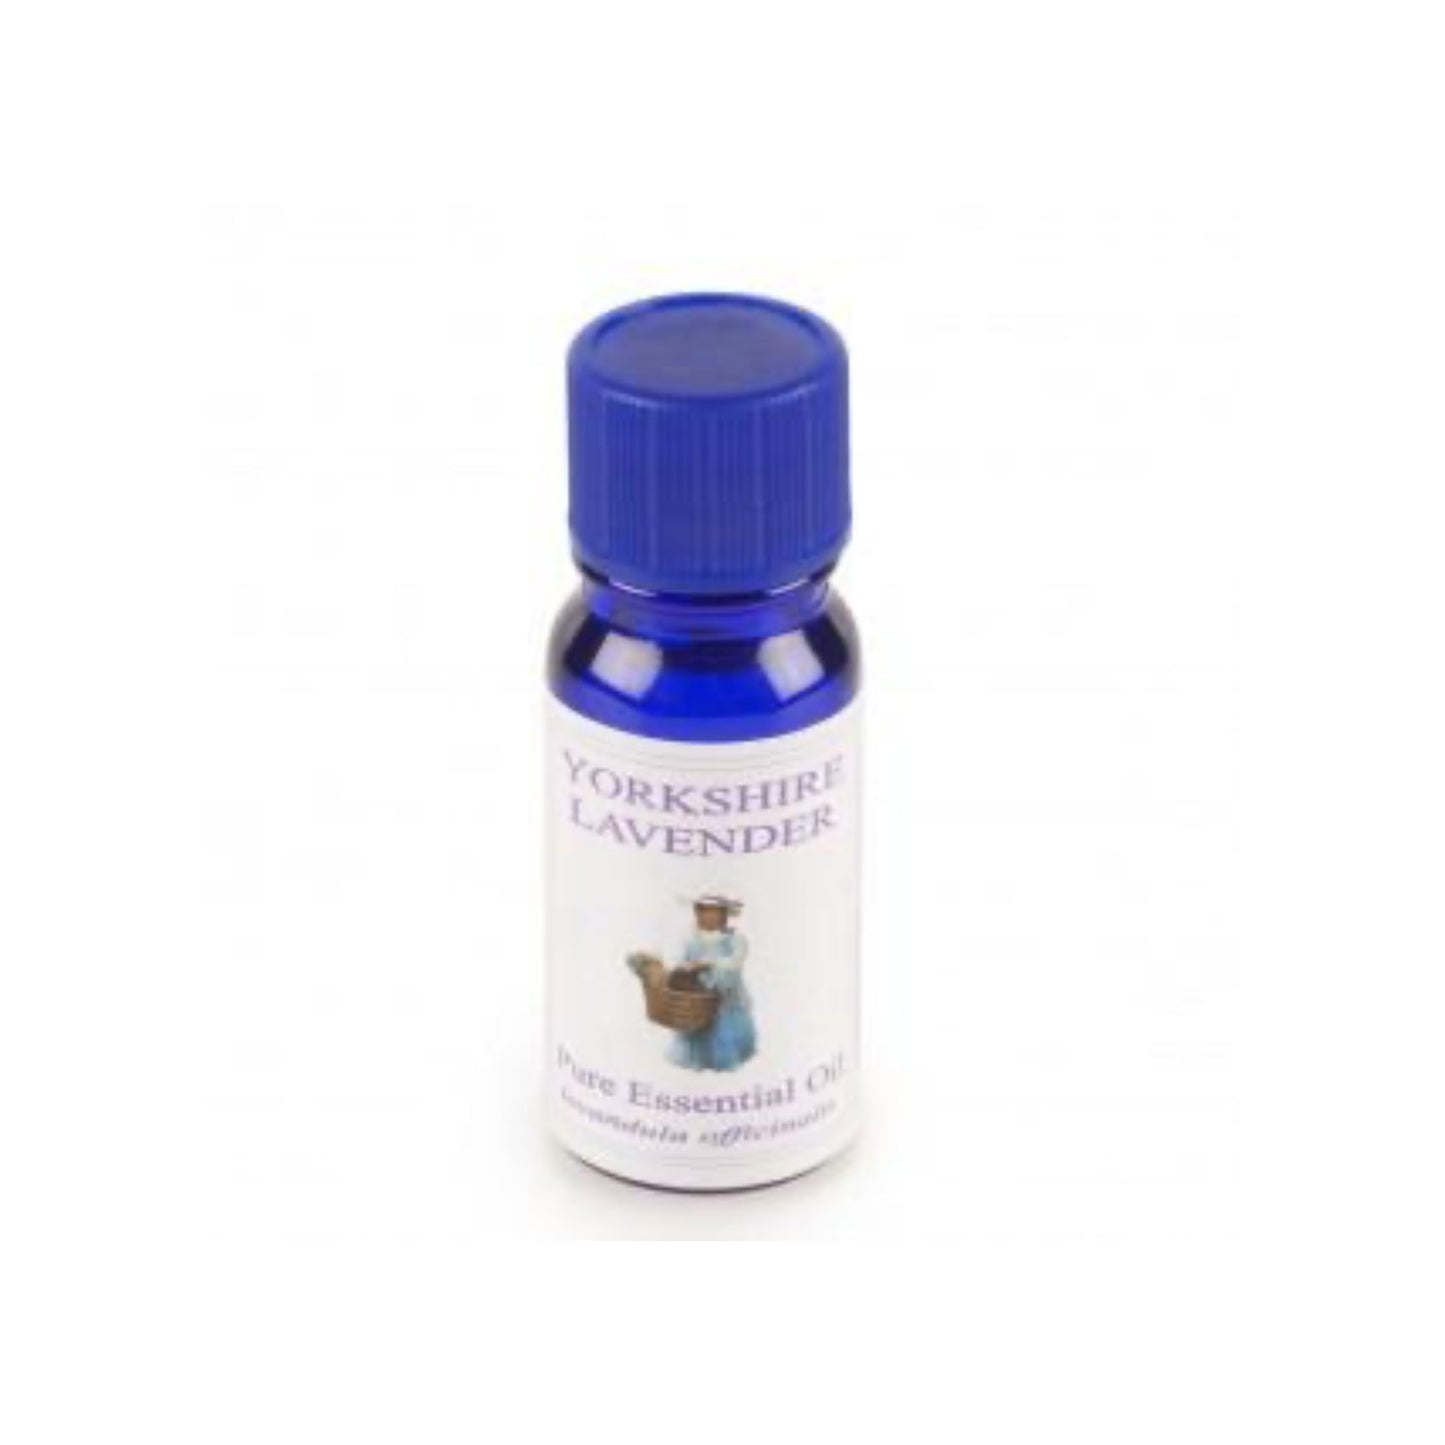 Yorkshire Lavender Essential Oil - The Great Yorkshire Shop